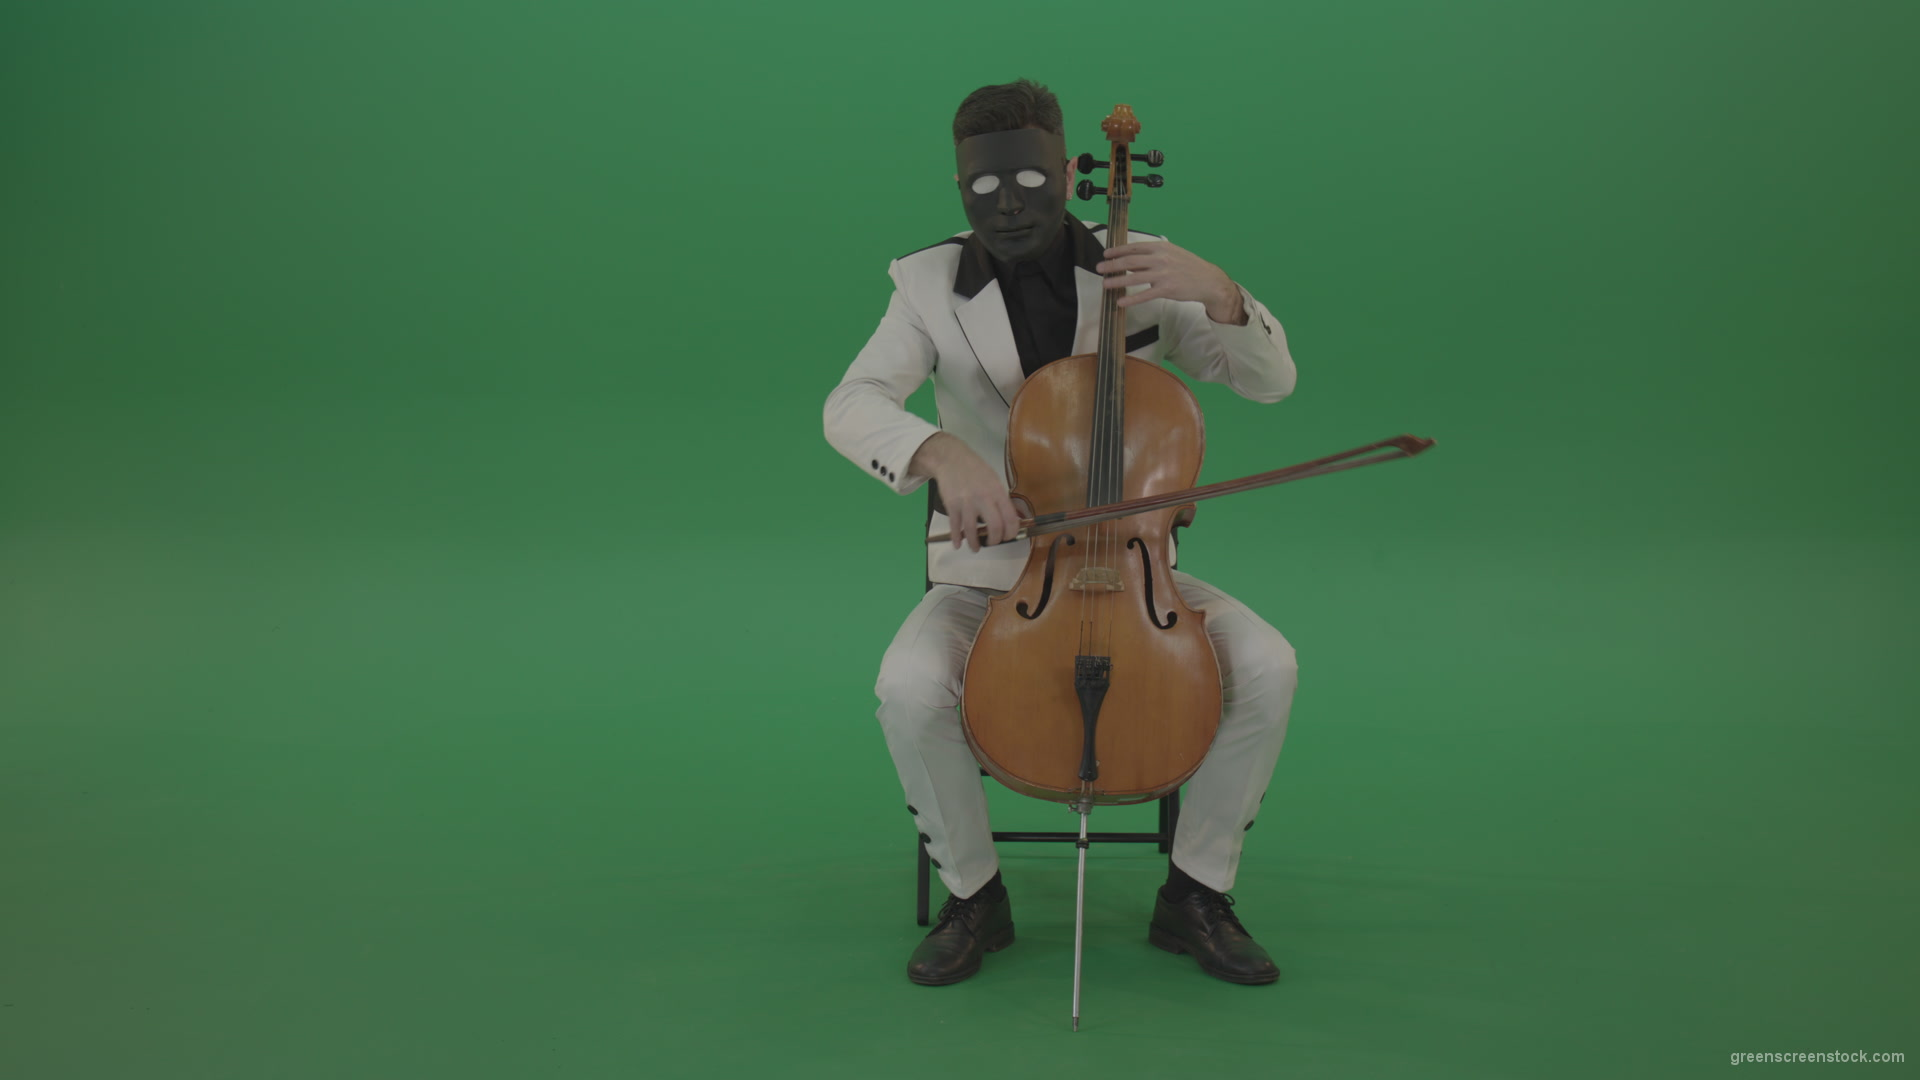 Man-plays-on-a-cello-in-a-white-suit-and-a-black-mask-with-white-eyes_002 Green Screen Stock